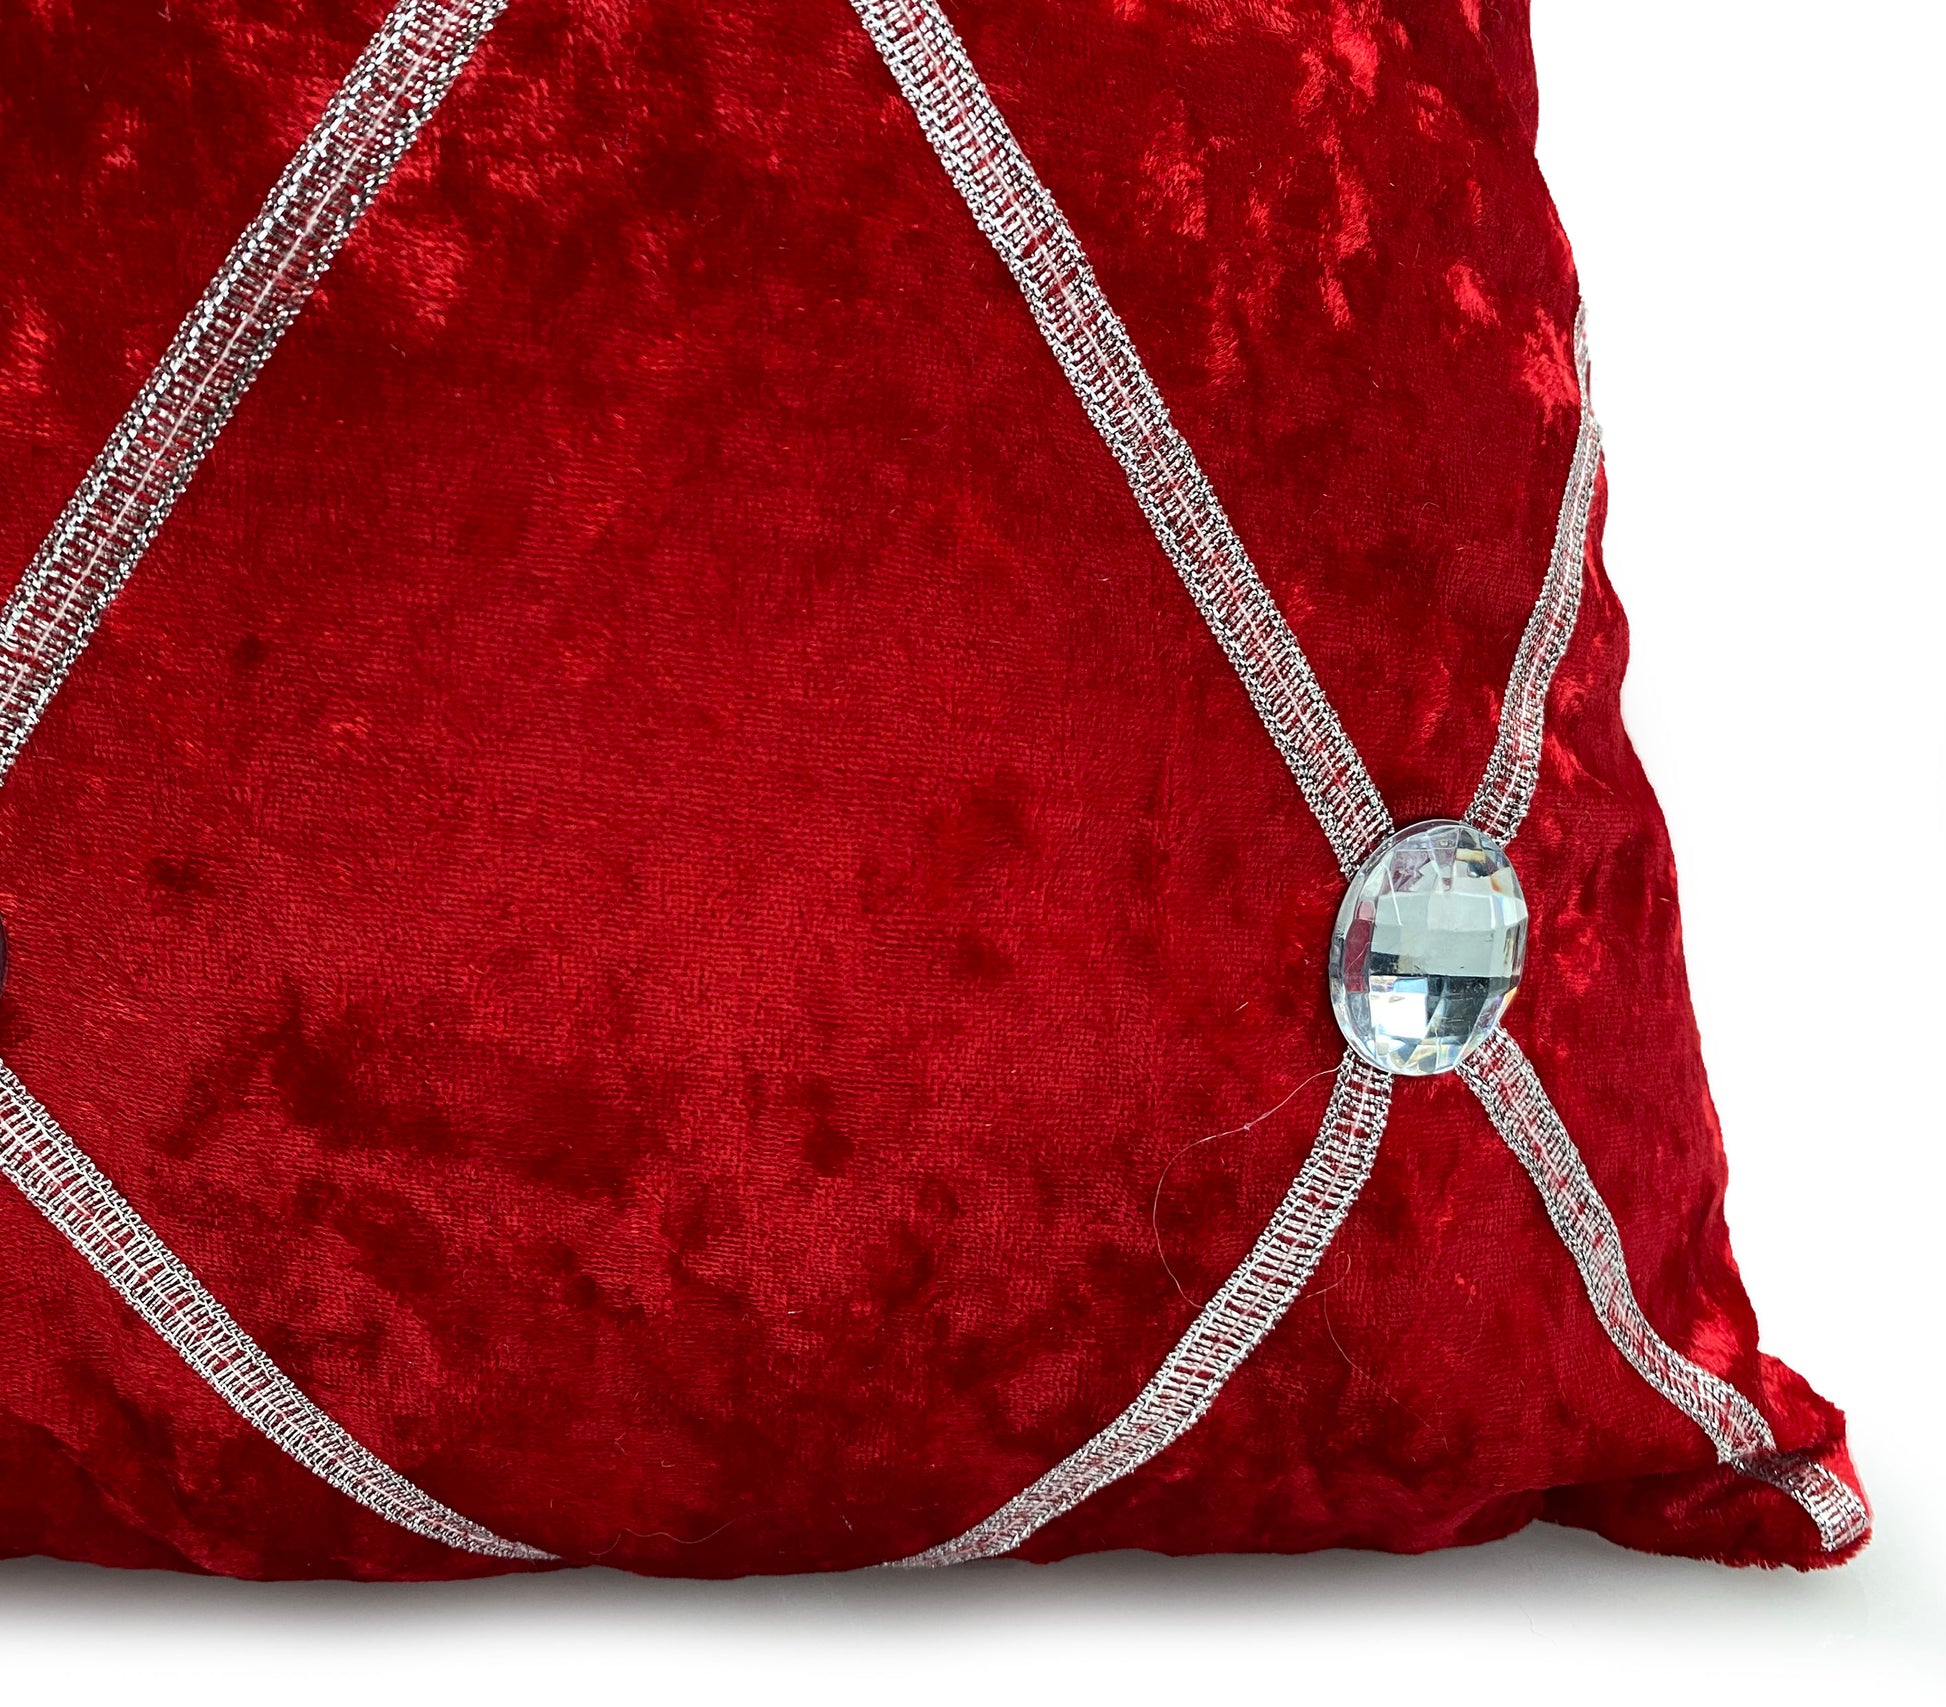 Large Crush Velvet Diamante Chesterfield Cushions or Covers Red Closer view